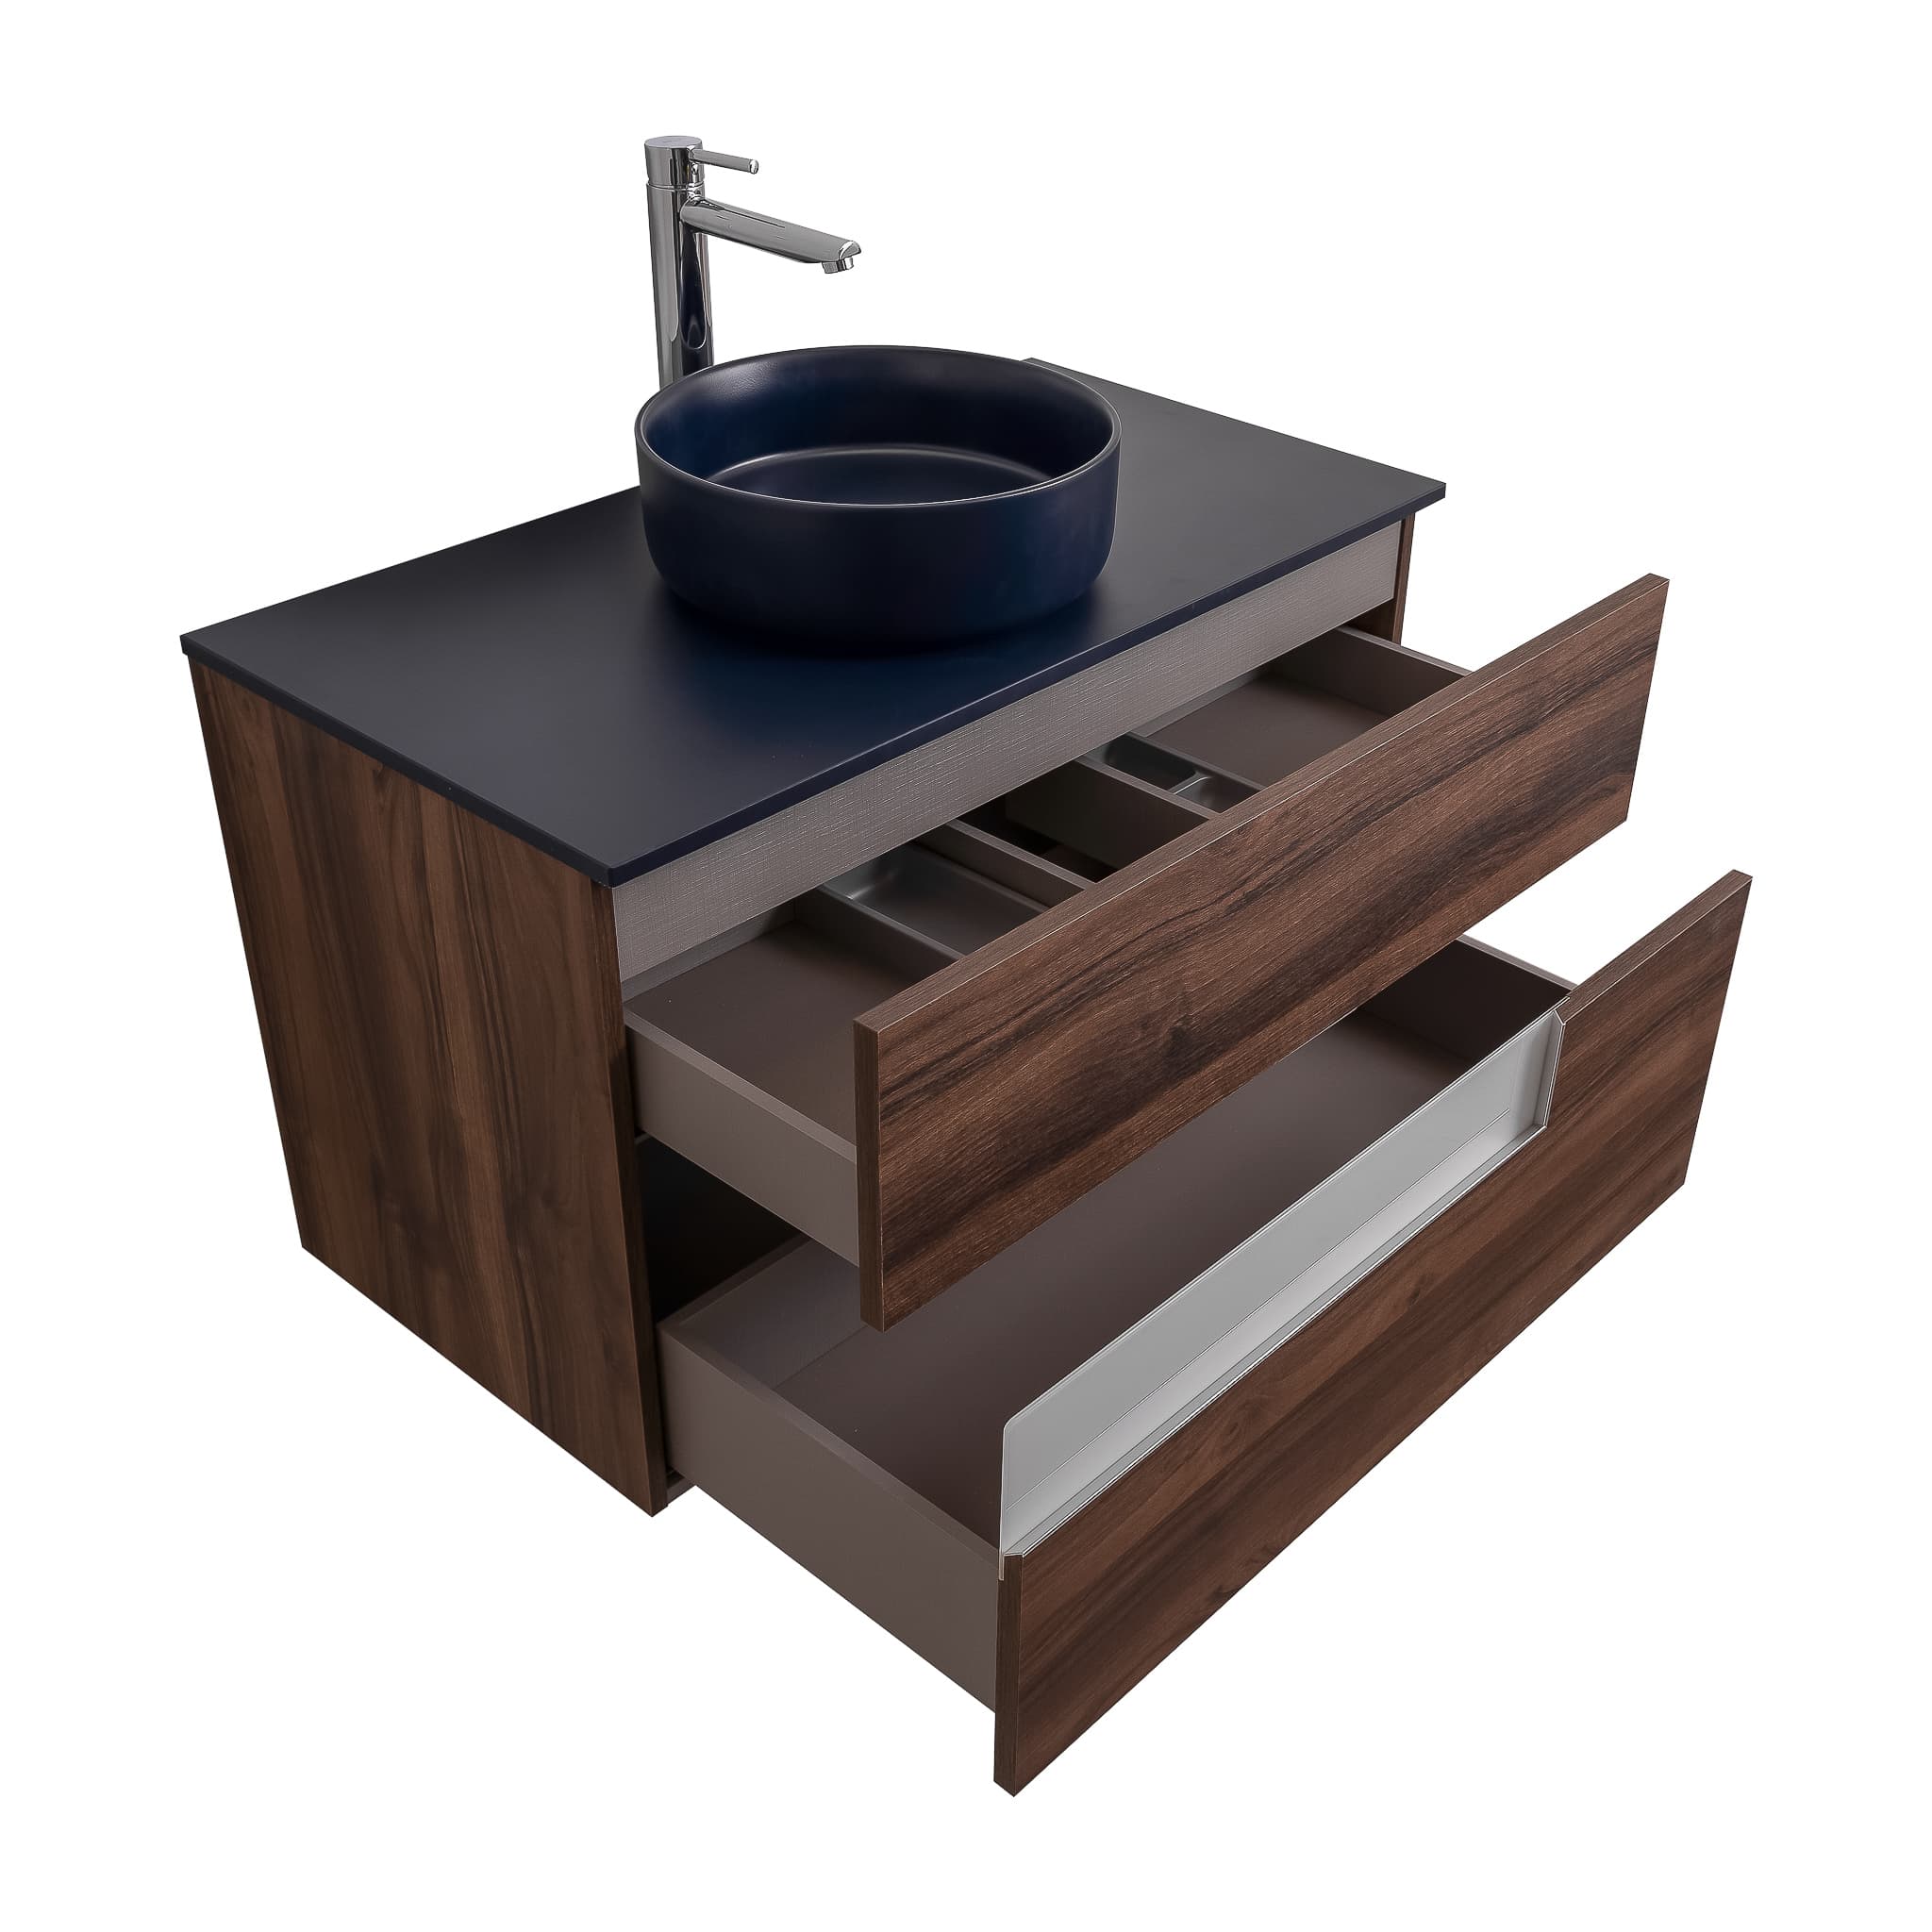 Vision 35.5 Valenti Medium Brown Wood Cabinet, Ares Navy Blue Top And Ares Navy Blue Ceramic Basin, Wall Mounted Modern Vanity Set